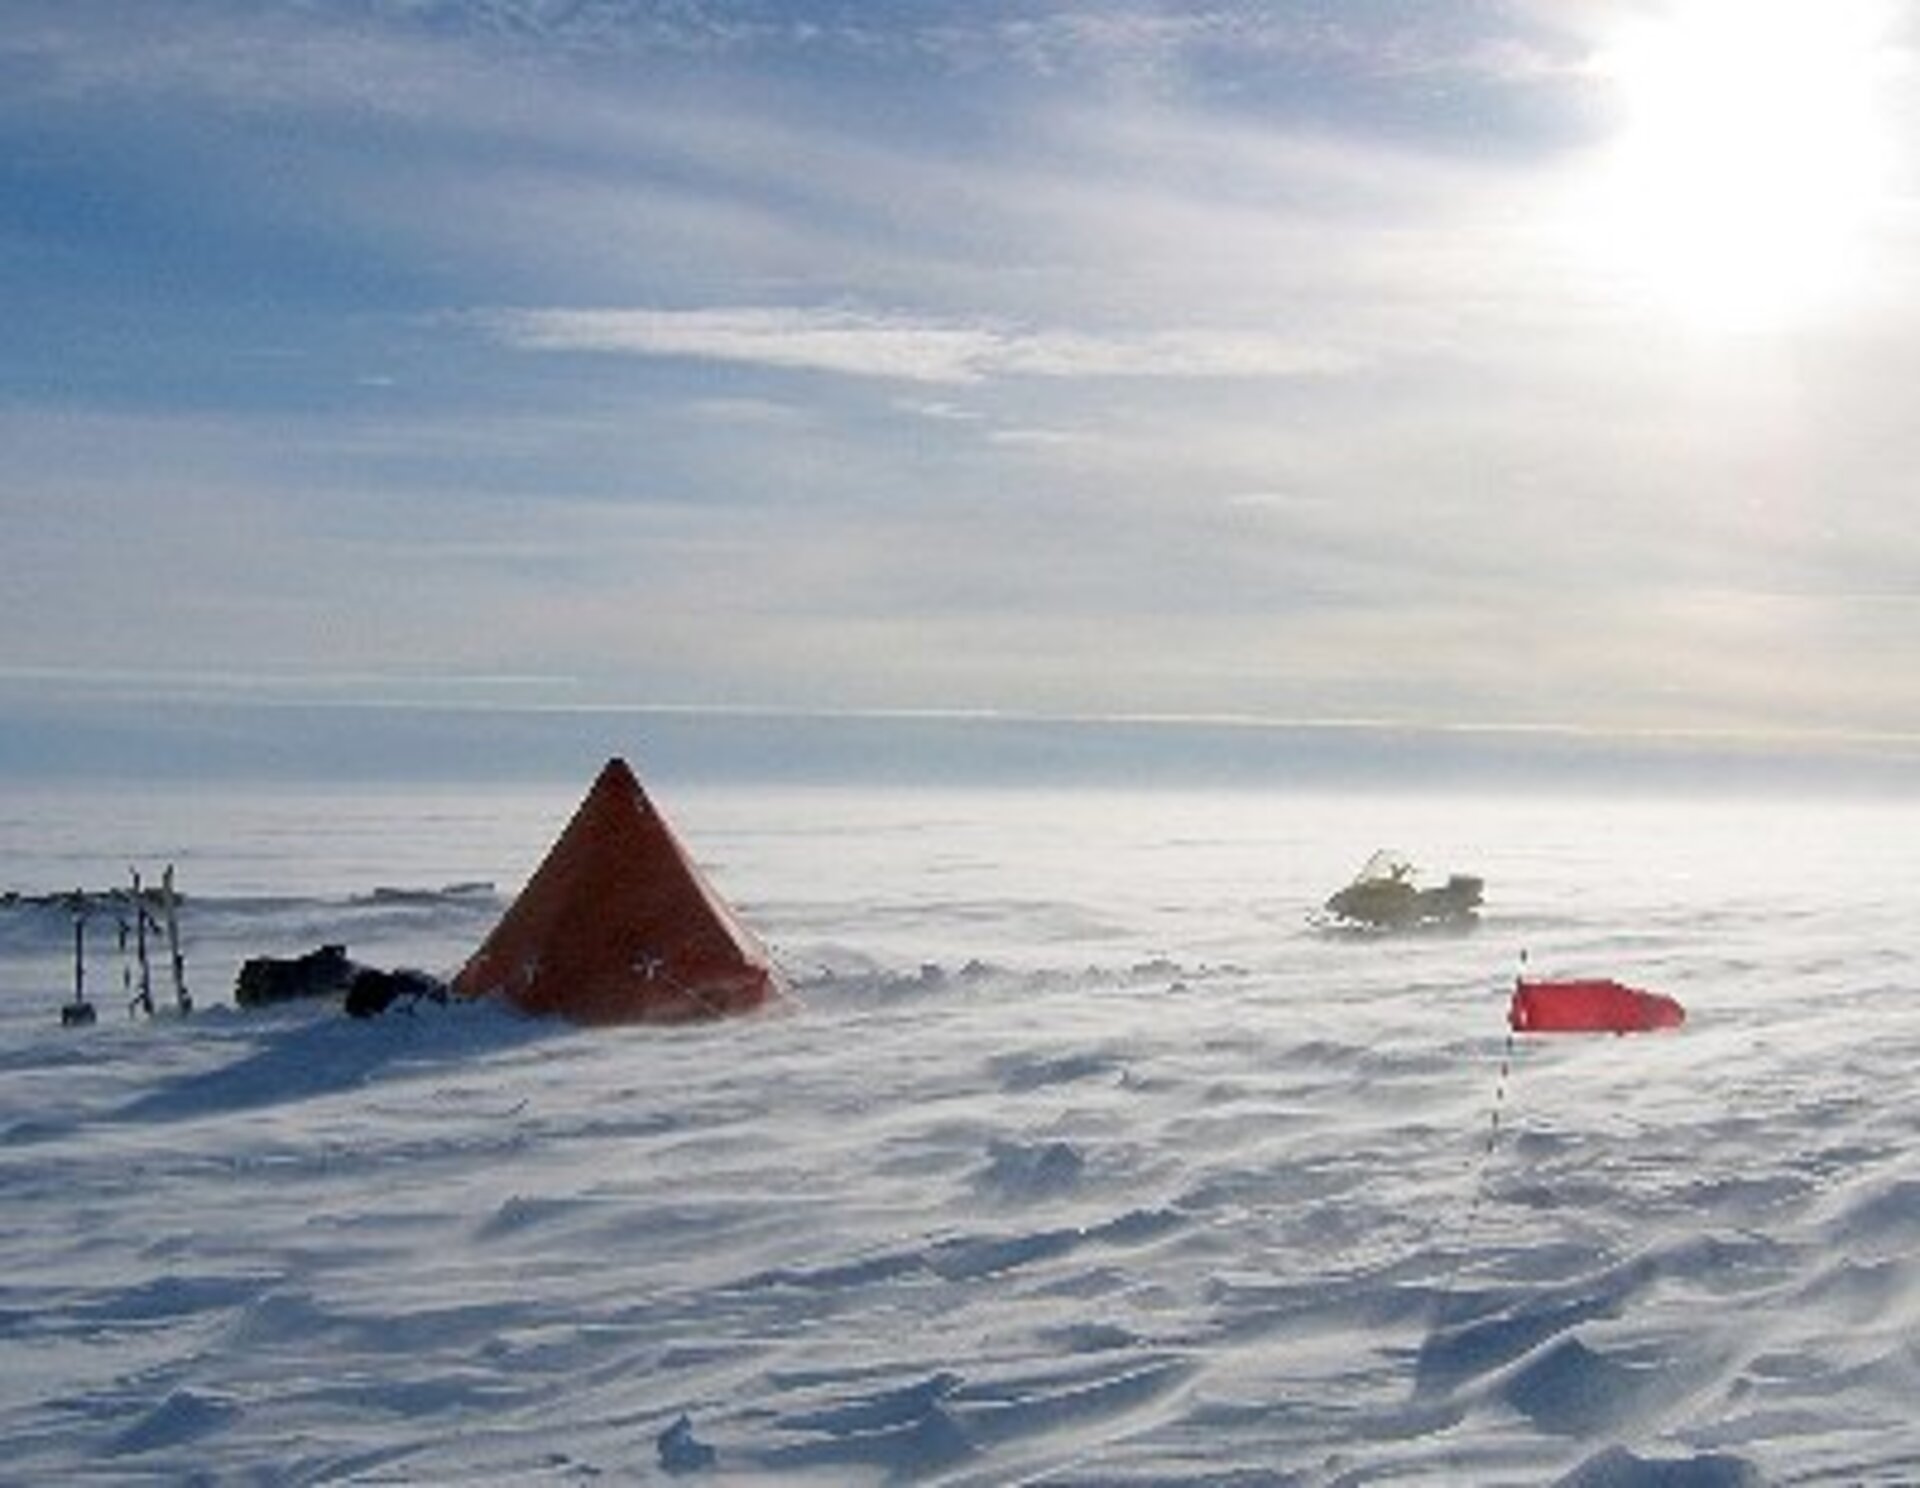 Windy conditions at base camp on the Greenland ice cap